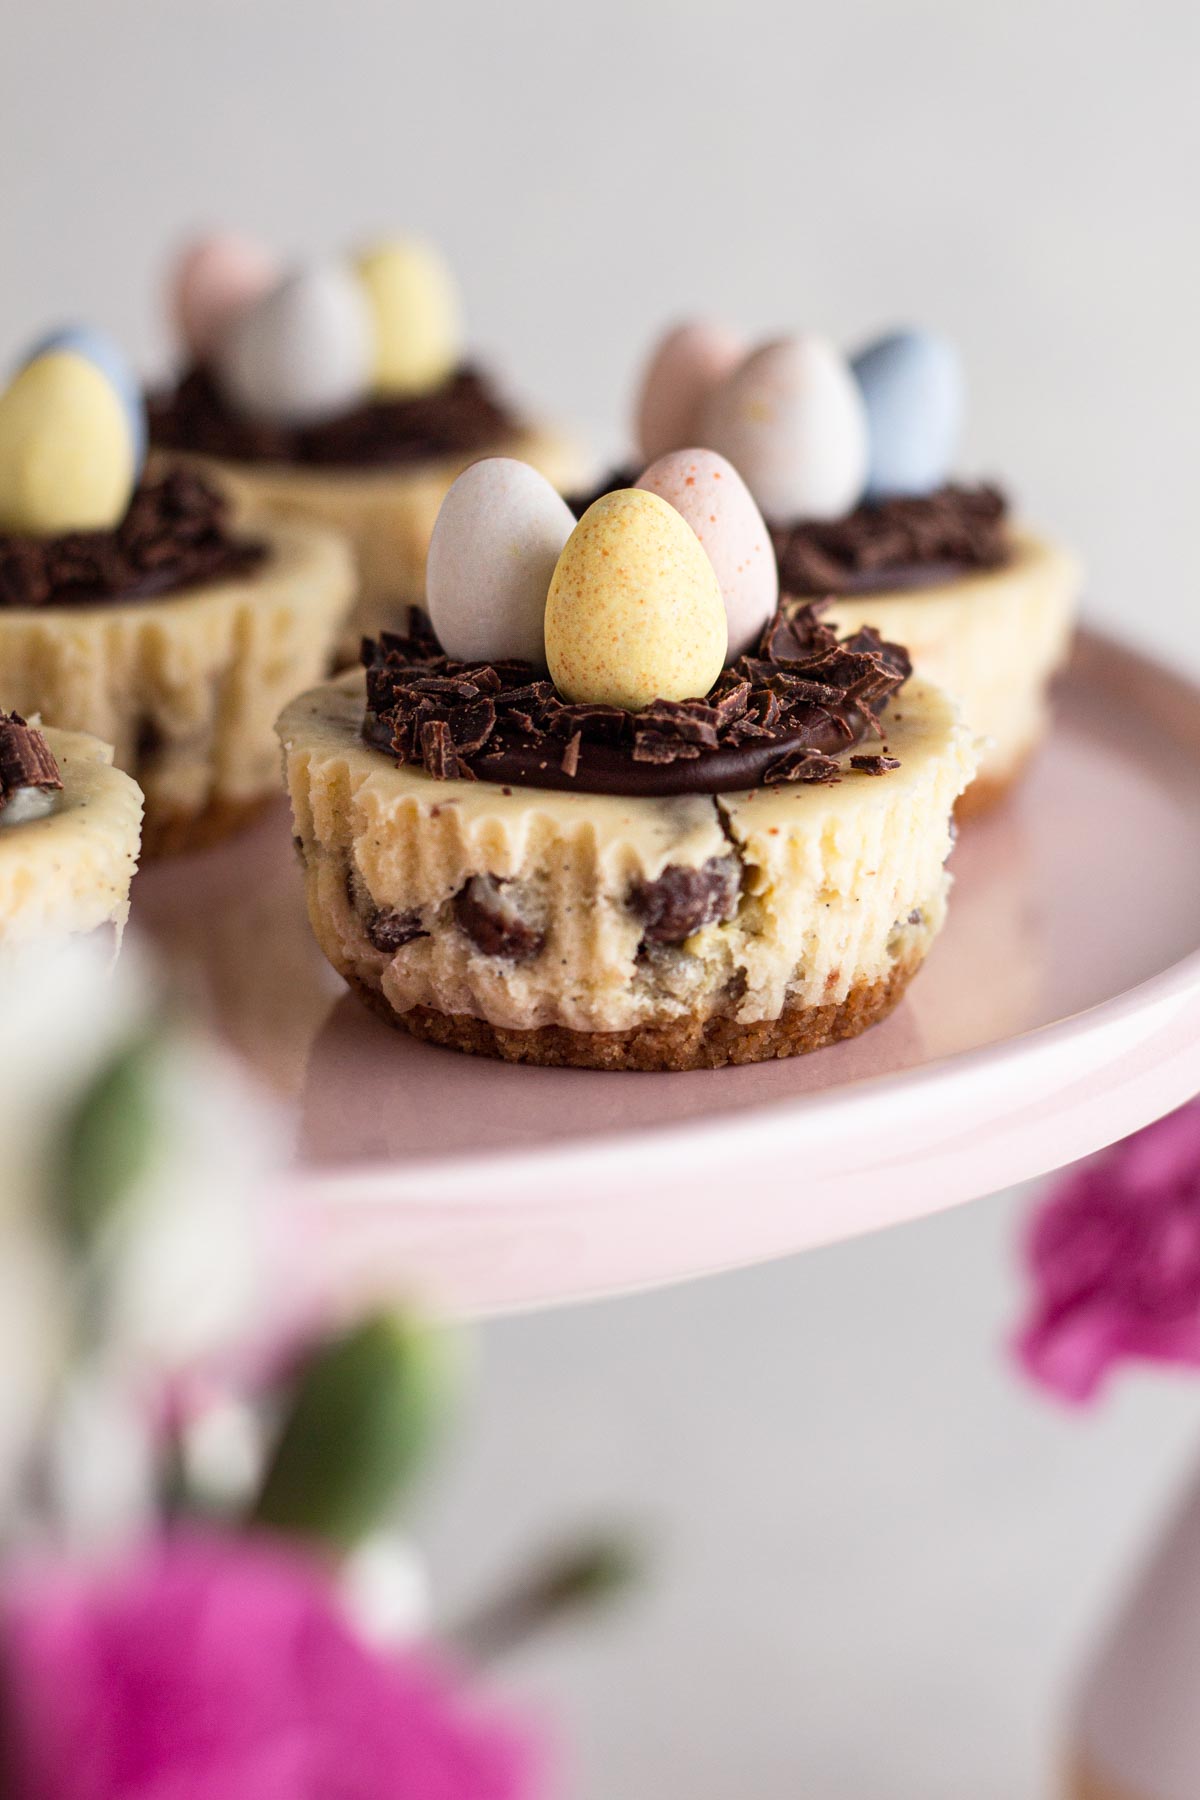 Mini cheesecakes topped with chocolate "nests" and Cadbury mini eggs on a pink cake stand with pink and white flowers.